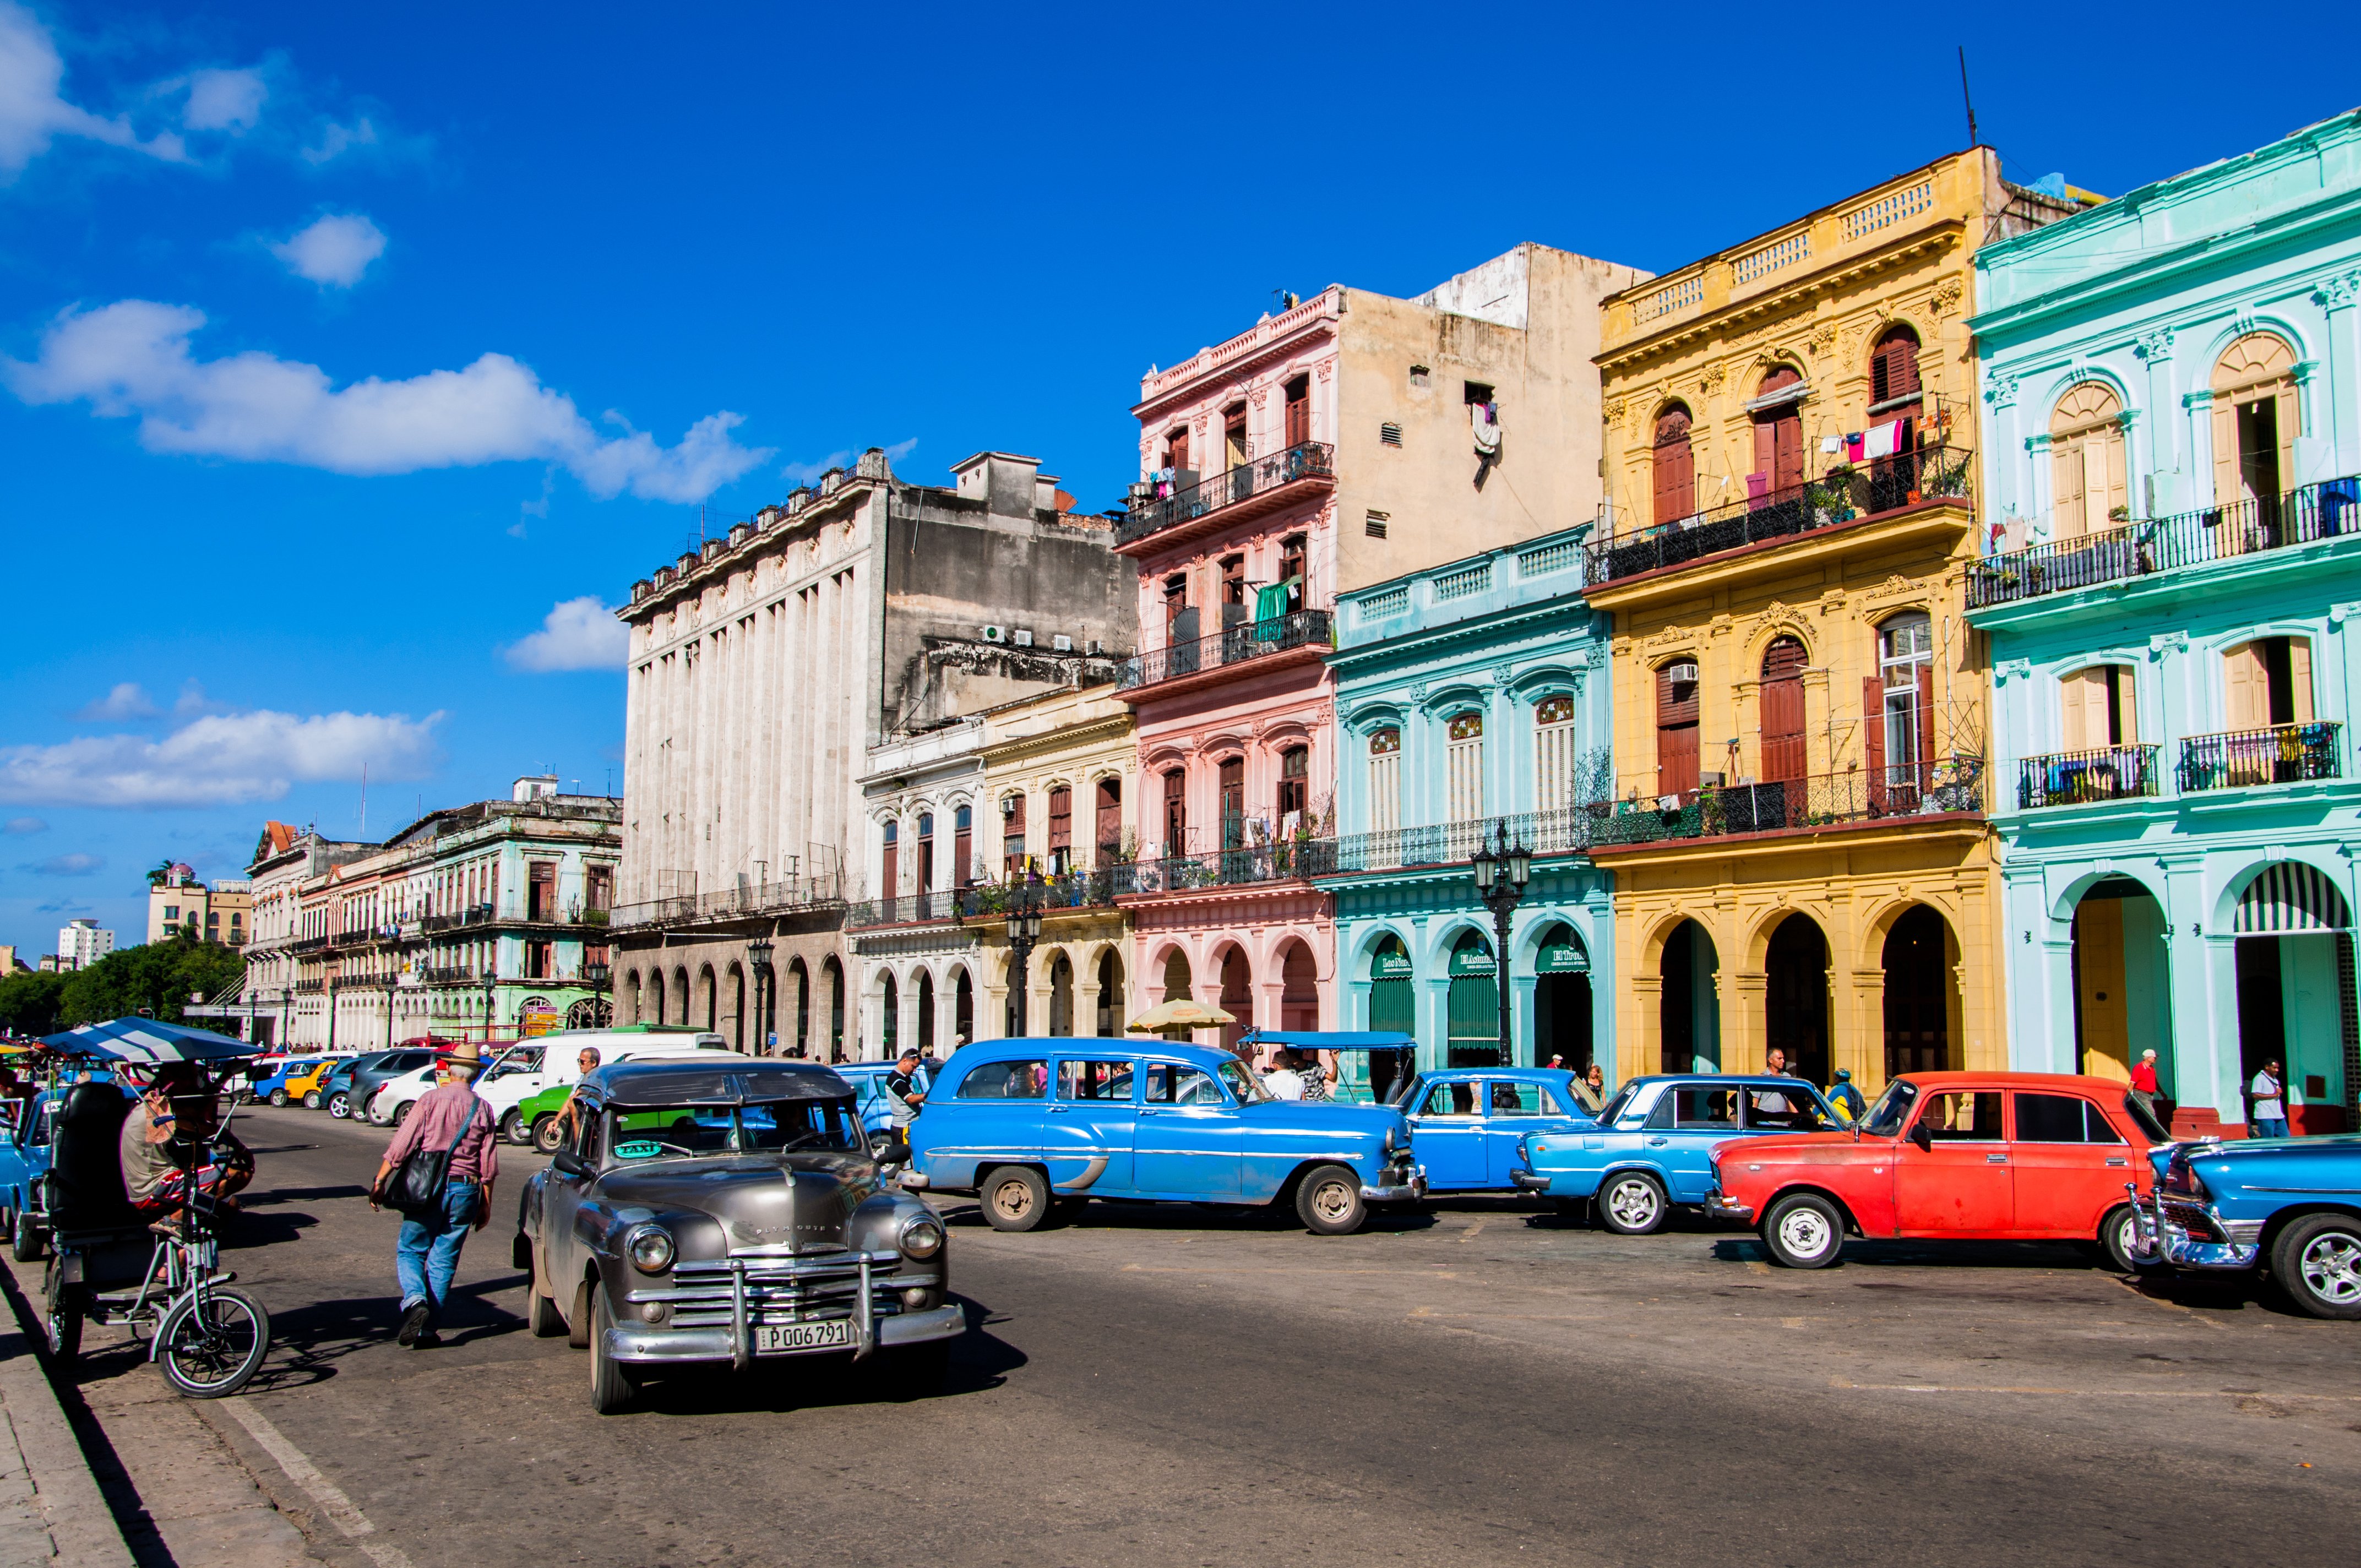 A picture of Havana. (notice the 50s cars?:)